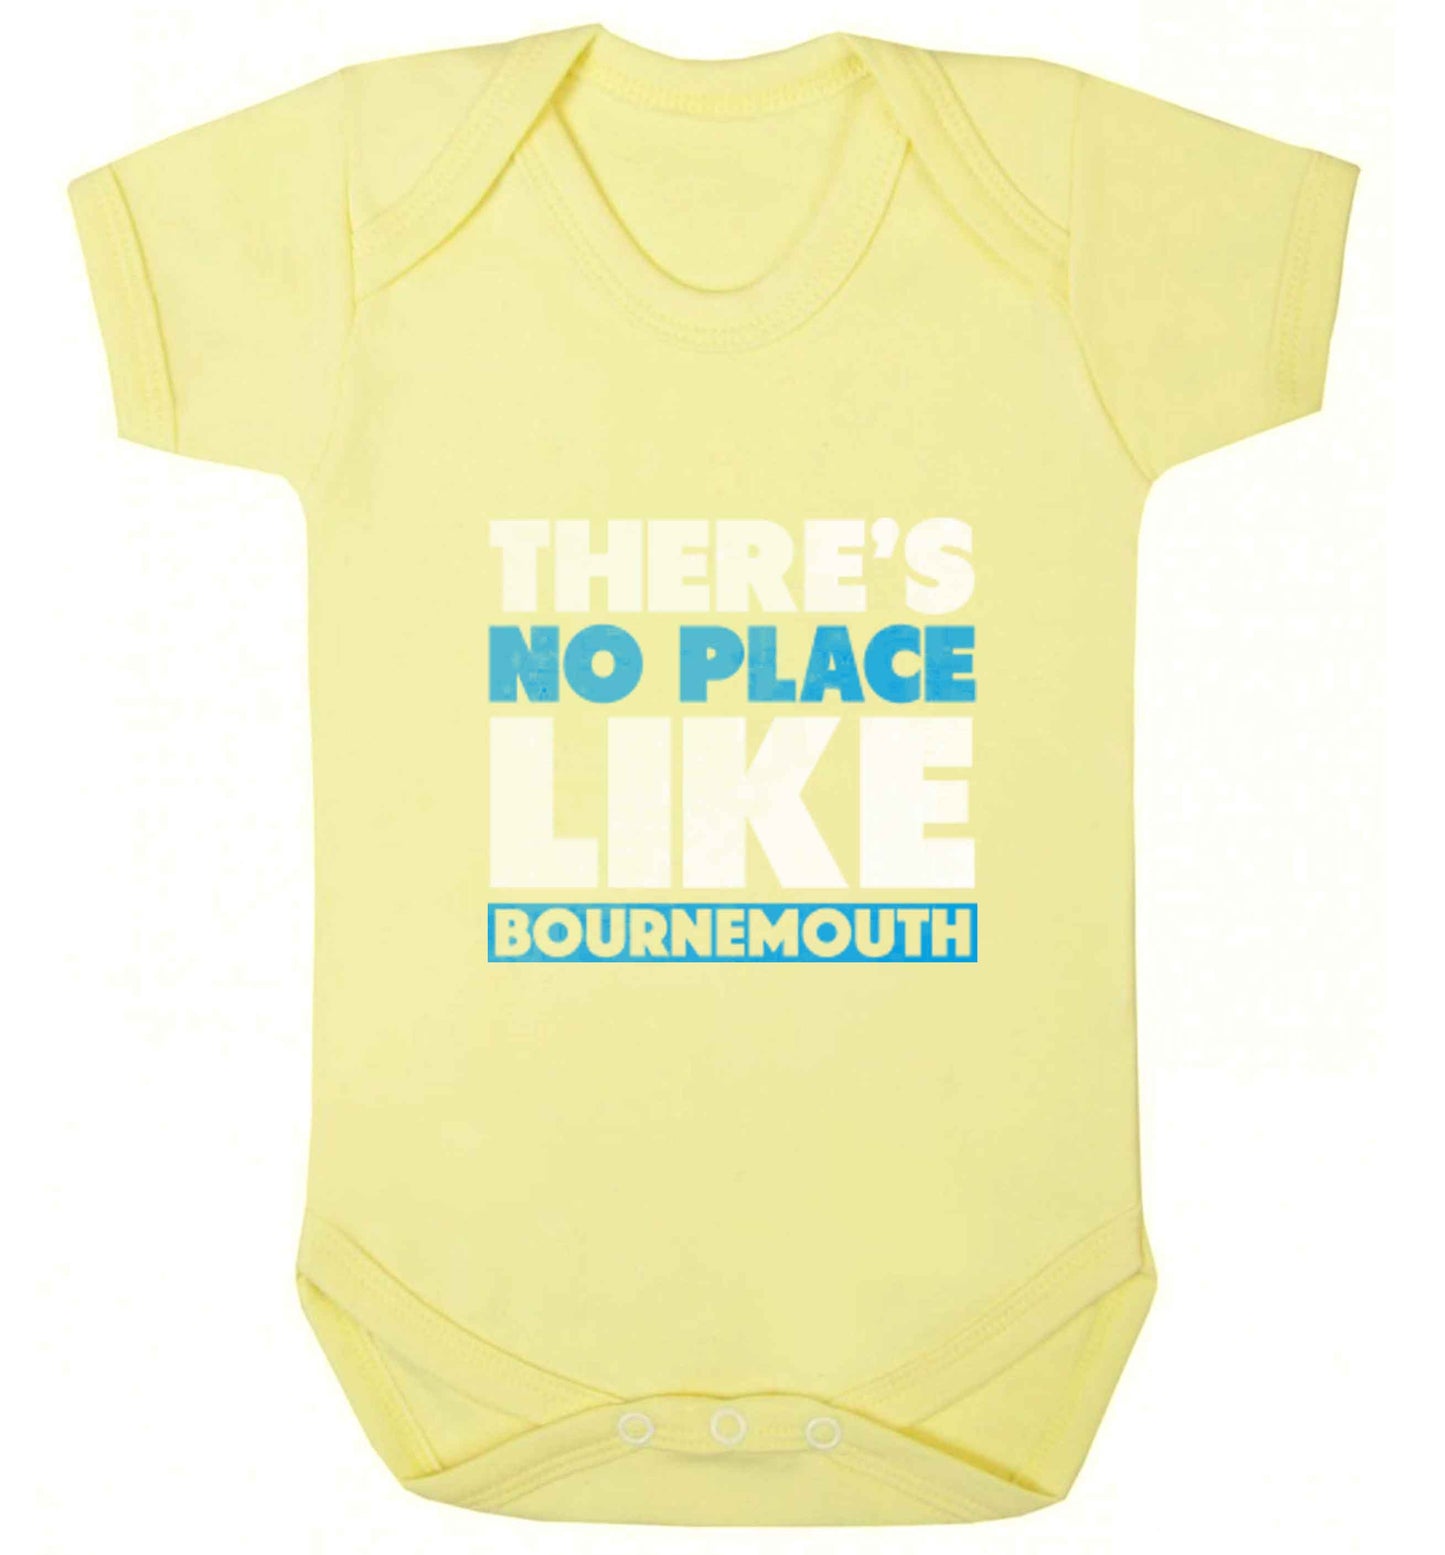 There's no place like Bournemouth baby vest pale yellow 18-24 months